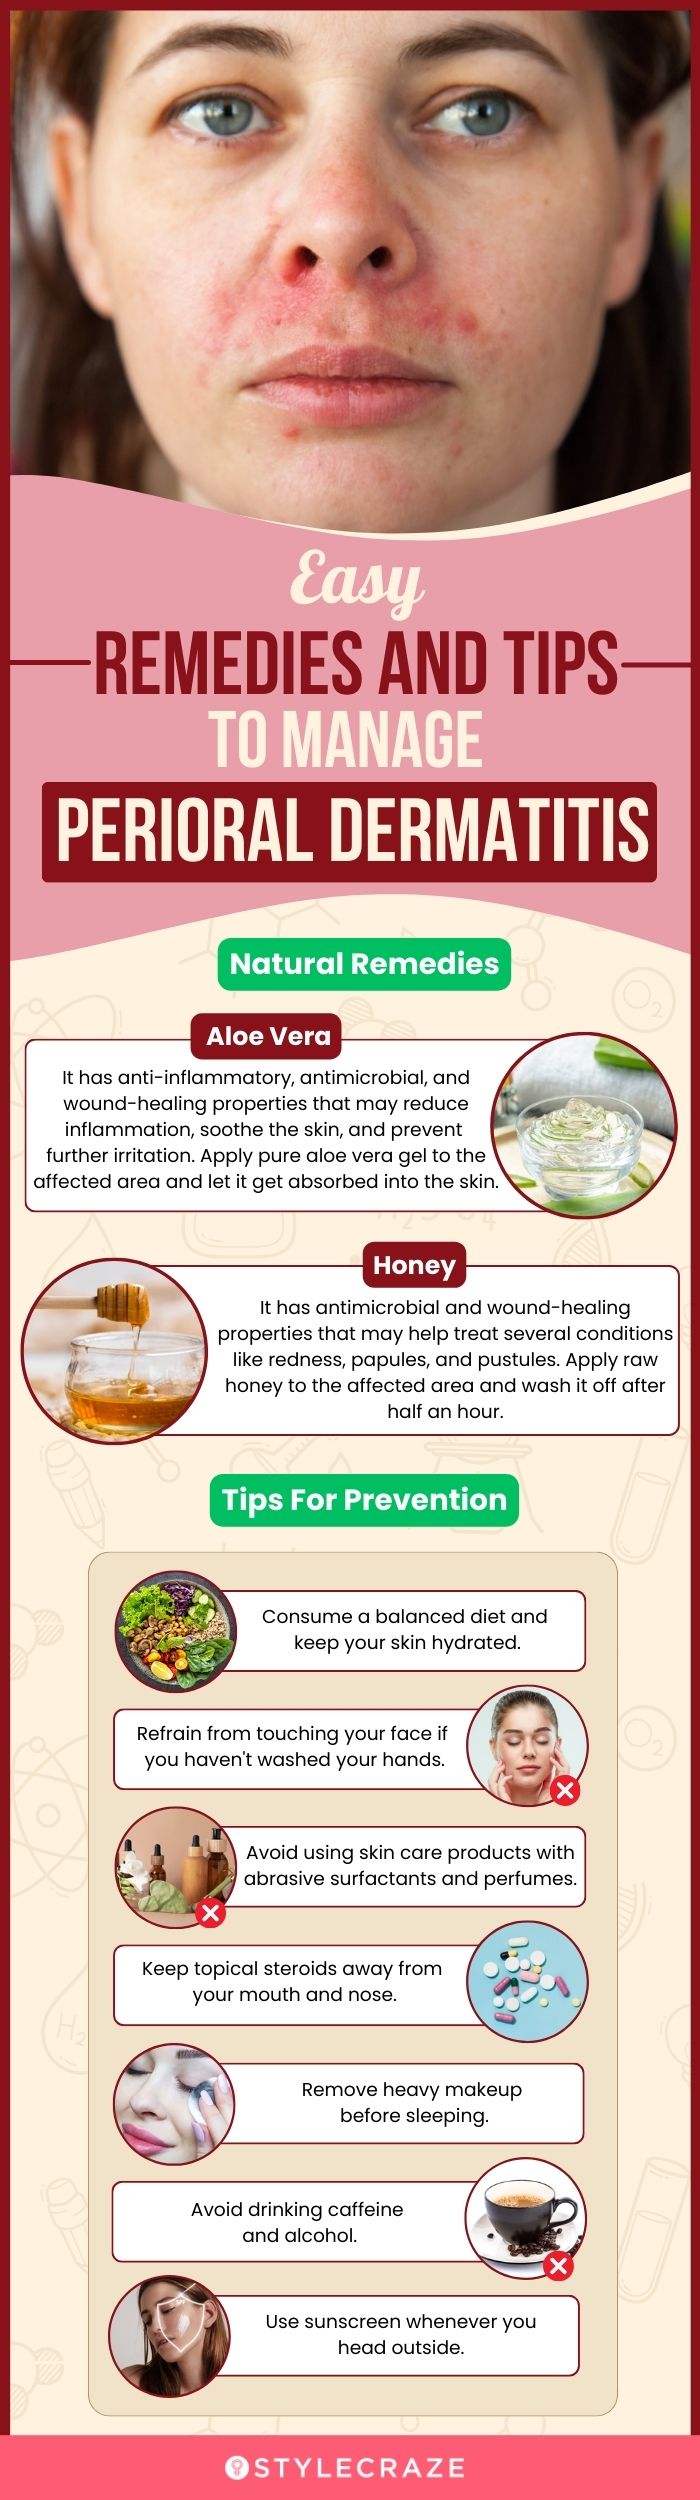 easy remedies and tips to manage perioral dermatitis (infographic)